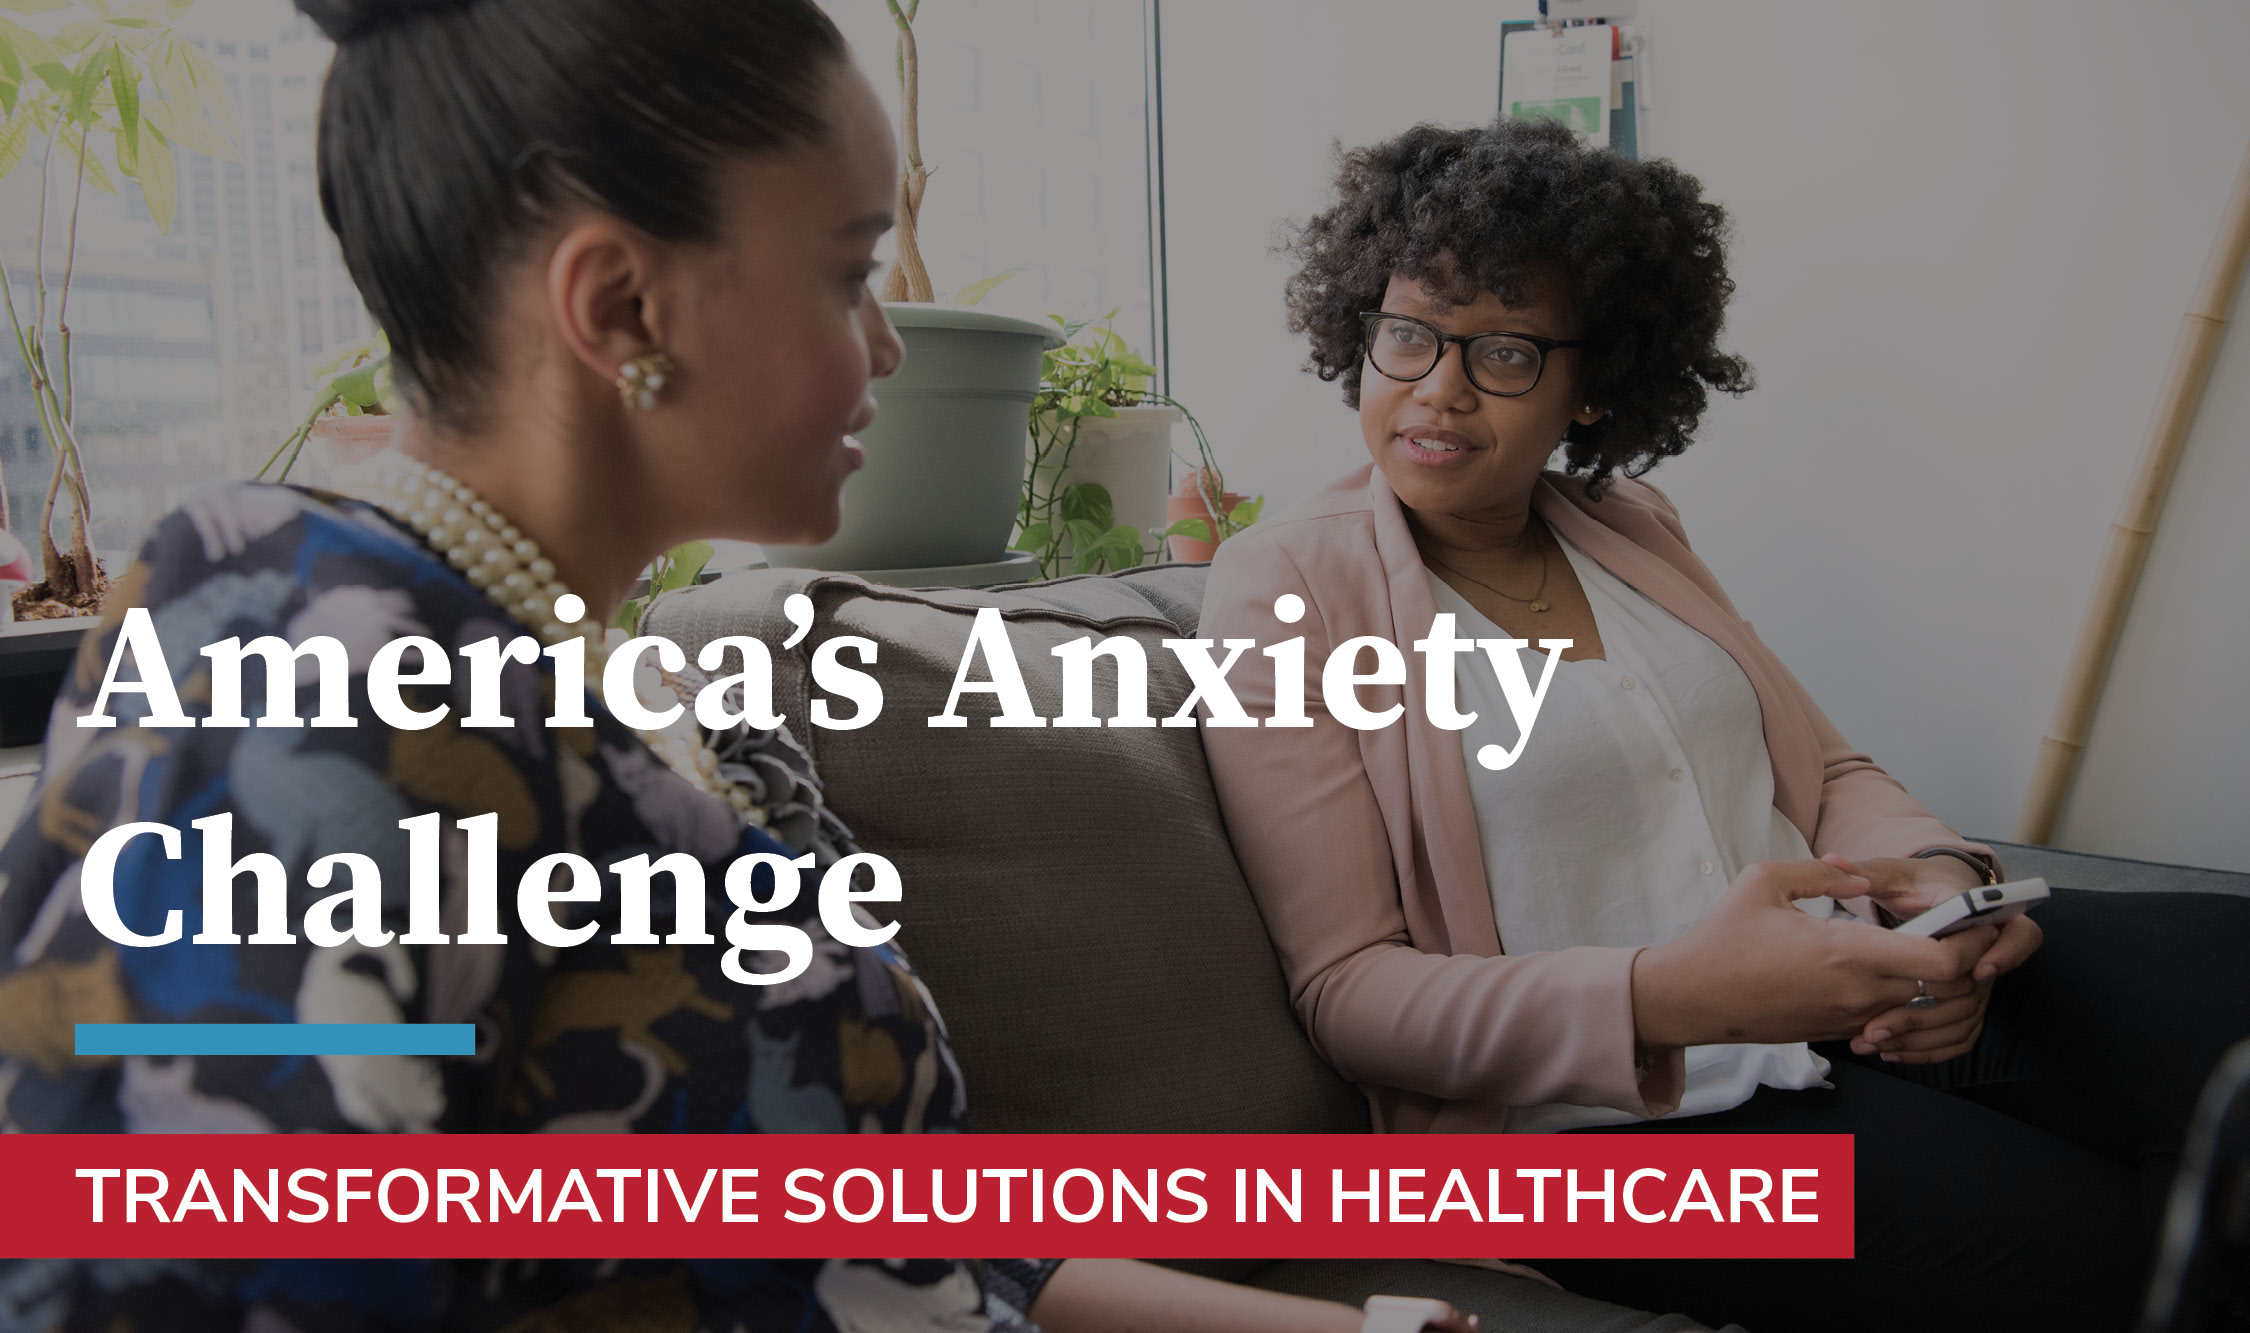 two women talking with a text overlay "America's Anxiety Challenge - Transformative Solutions in Healthcare"